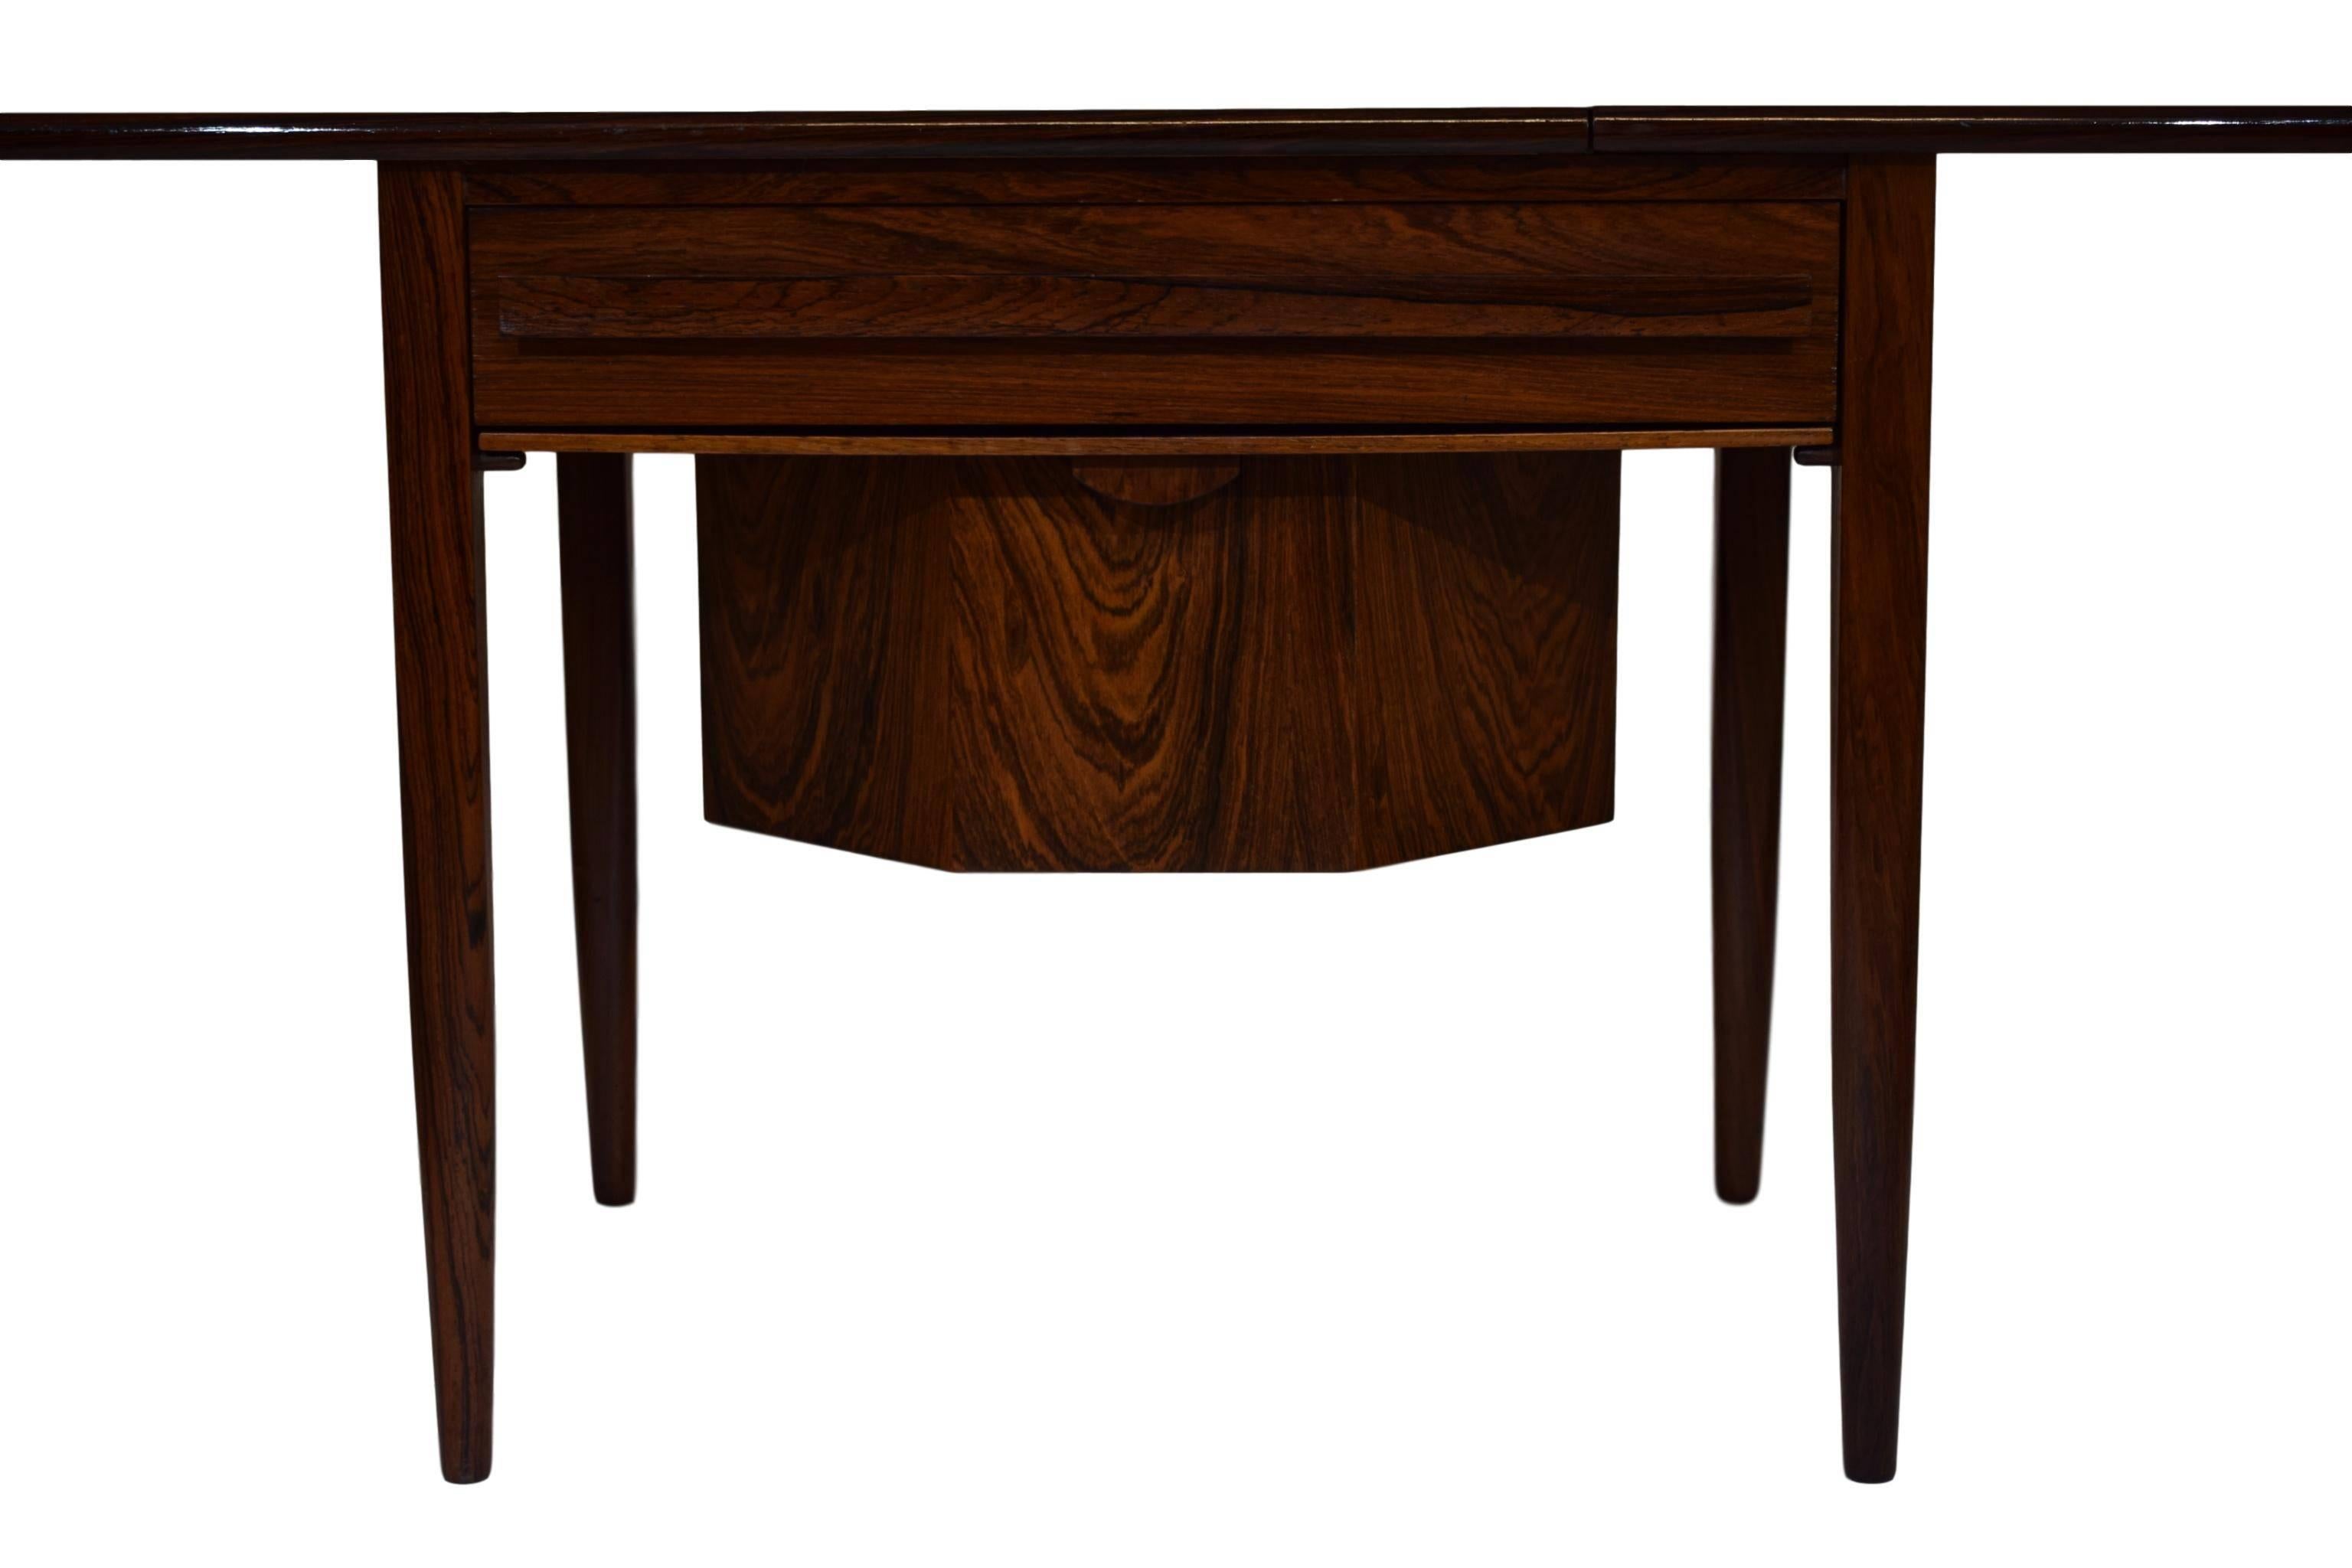 Scandinavian Modern Danish Midcentury Sewing Table with Drop-Leaf by Johannes Andersen, Rosewood For Sale